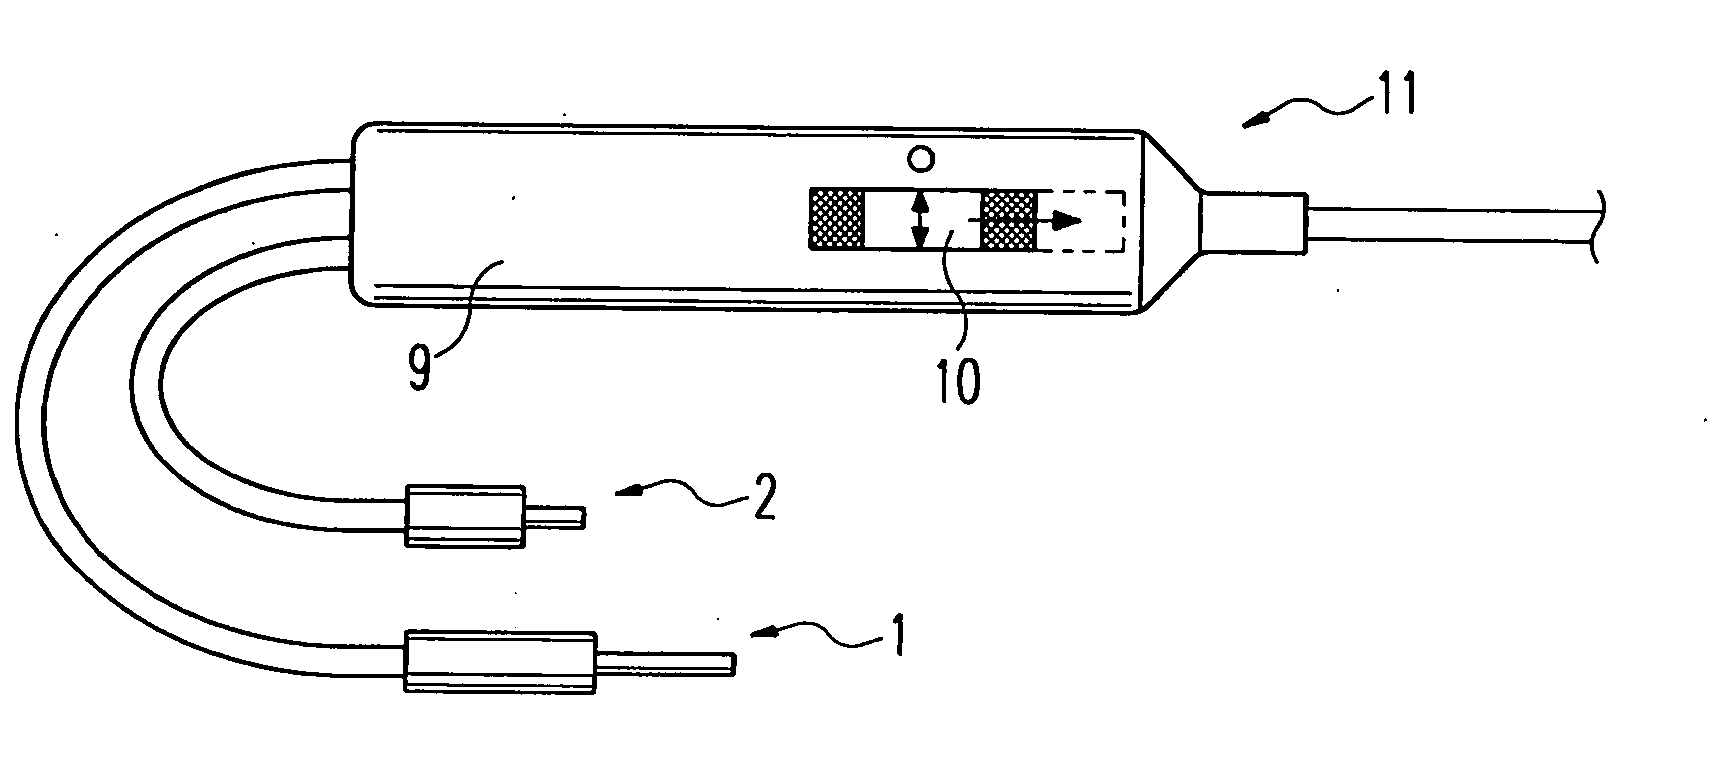 Endoscopic Surgical Instrument